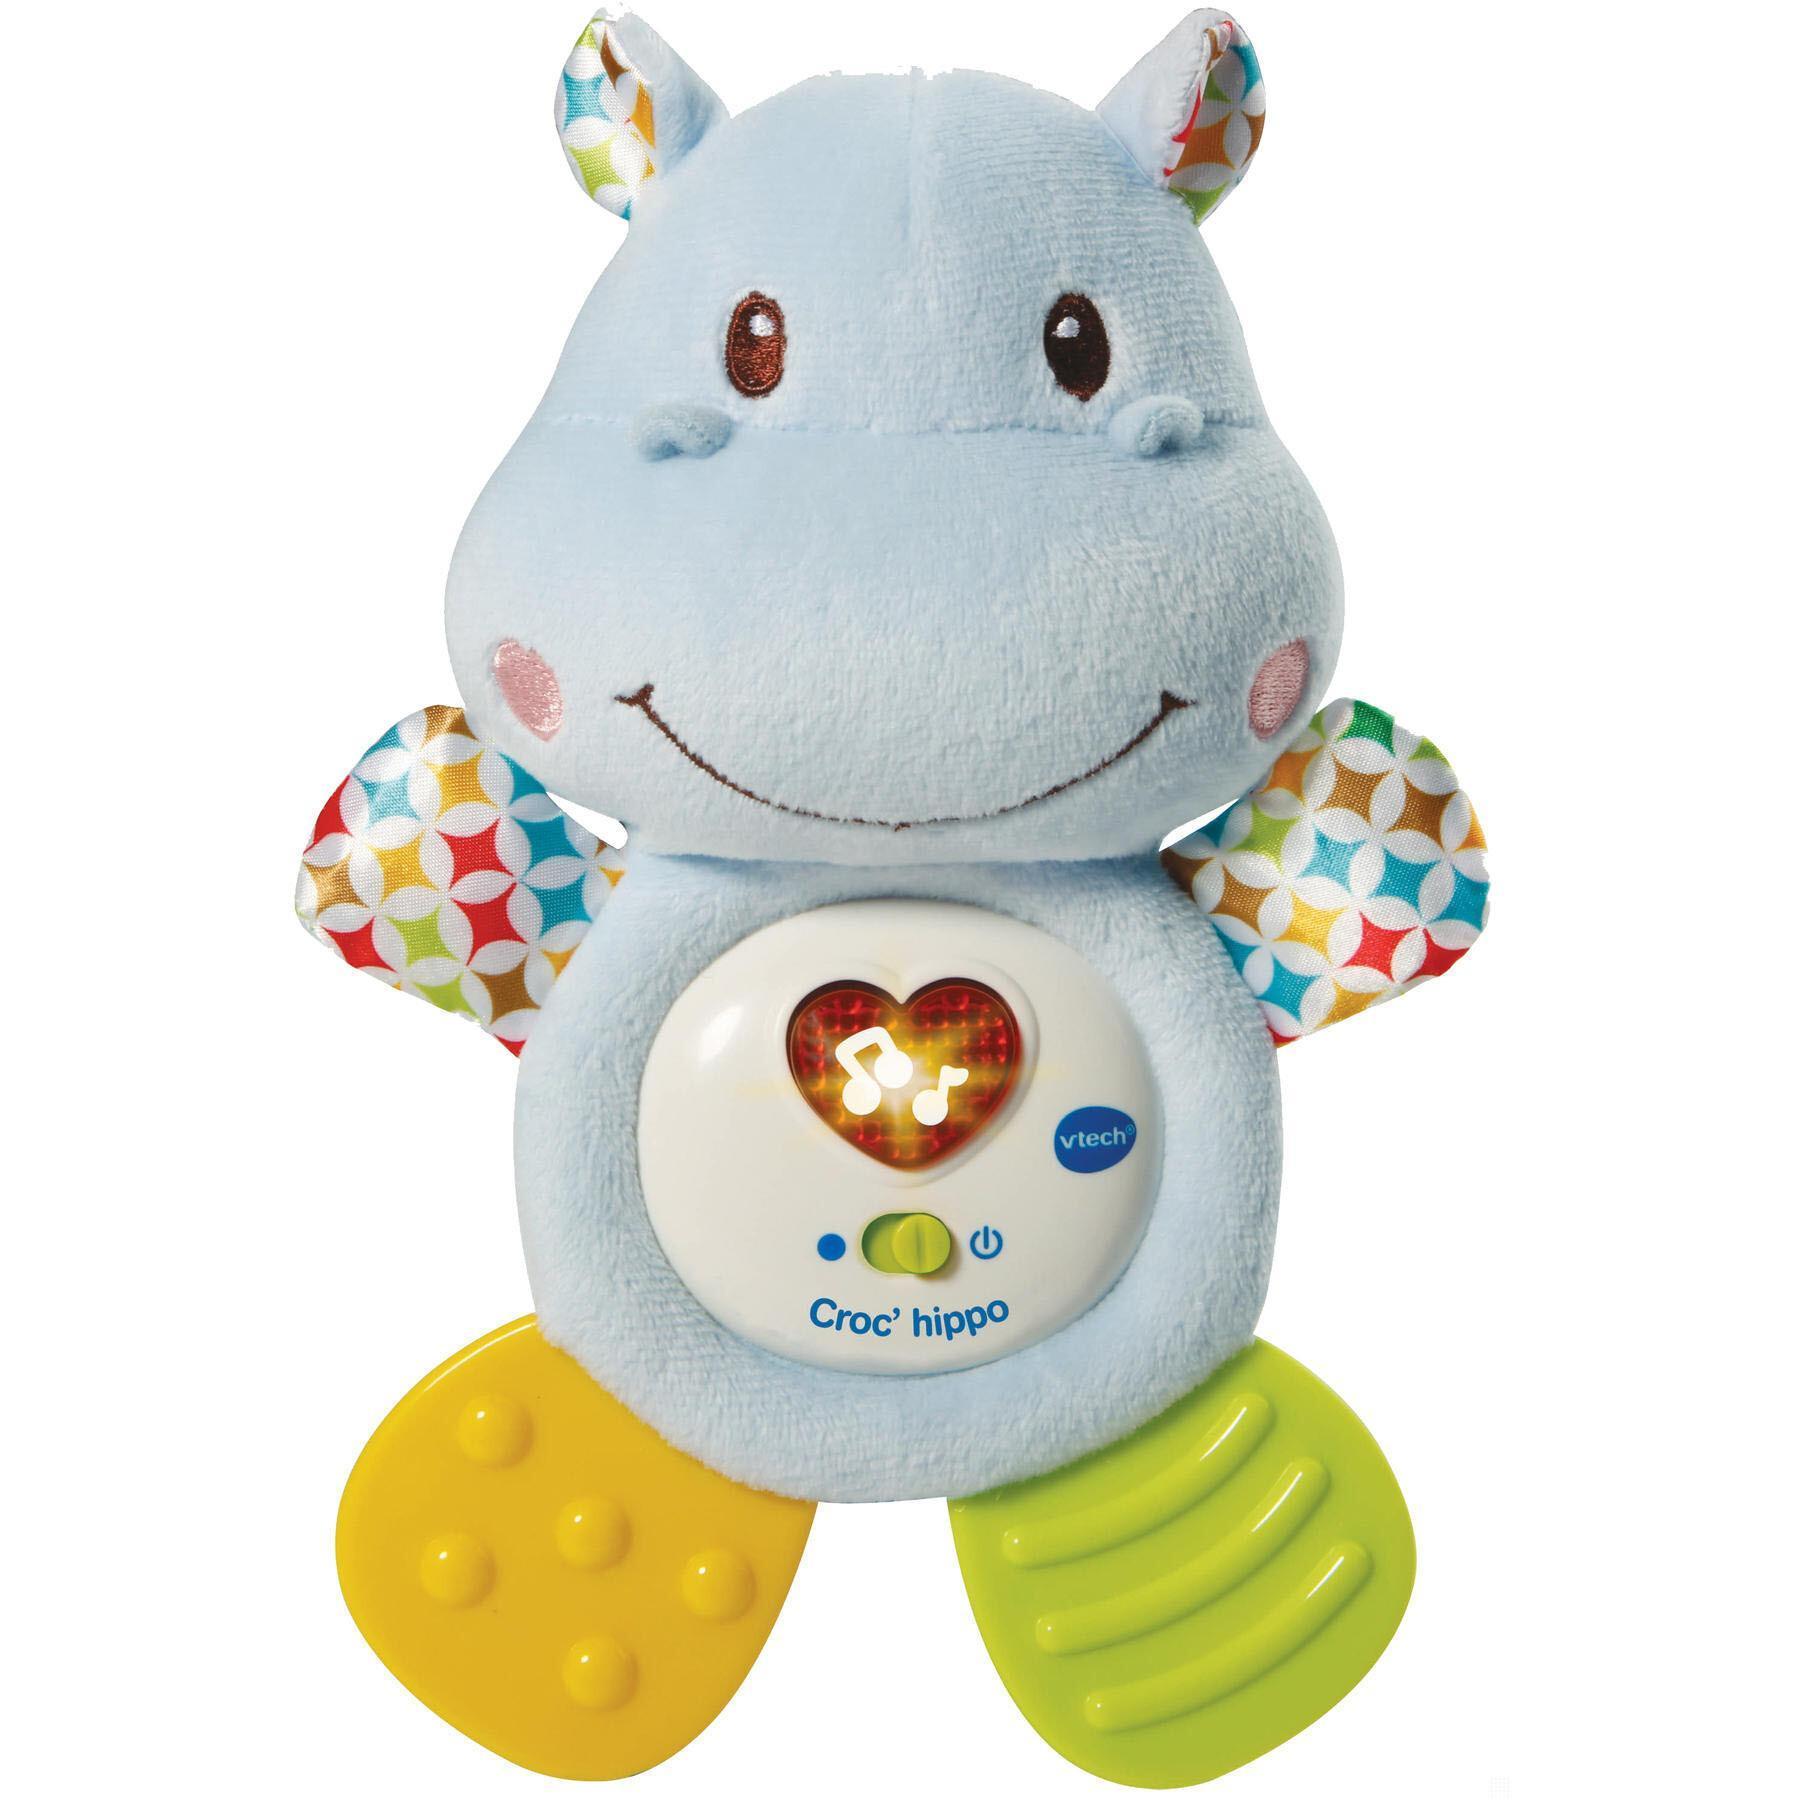 Musikalisches Mobile croc hippo blau Vtech Electronics Europe